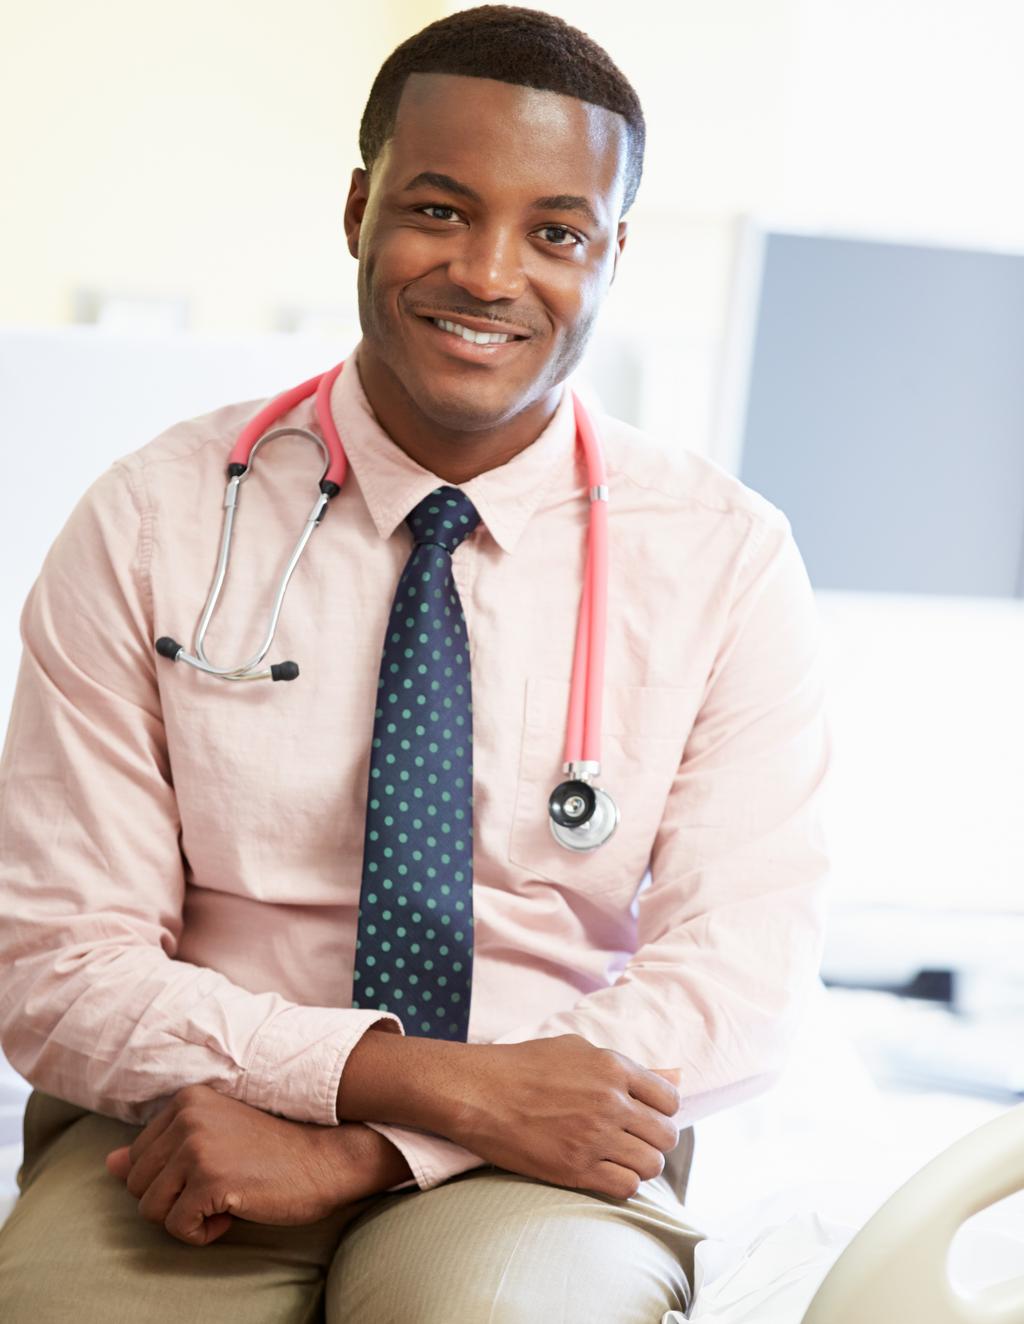 Background The National LGBT Health Education Center started conducting direct training and technical assistance with Federally Qualified Health Centers in 2014.